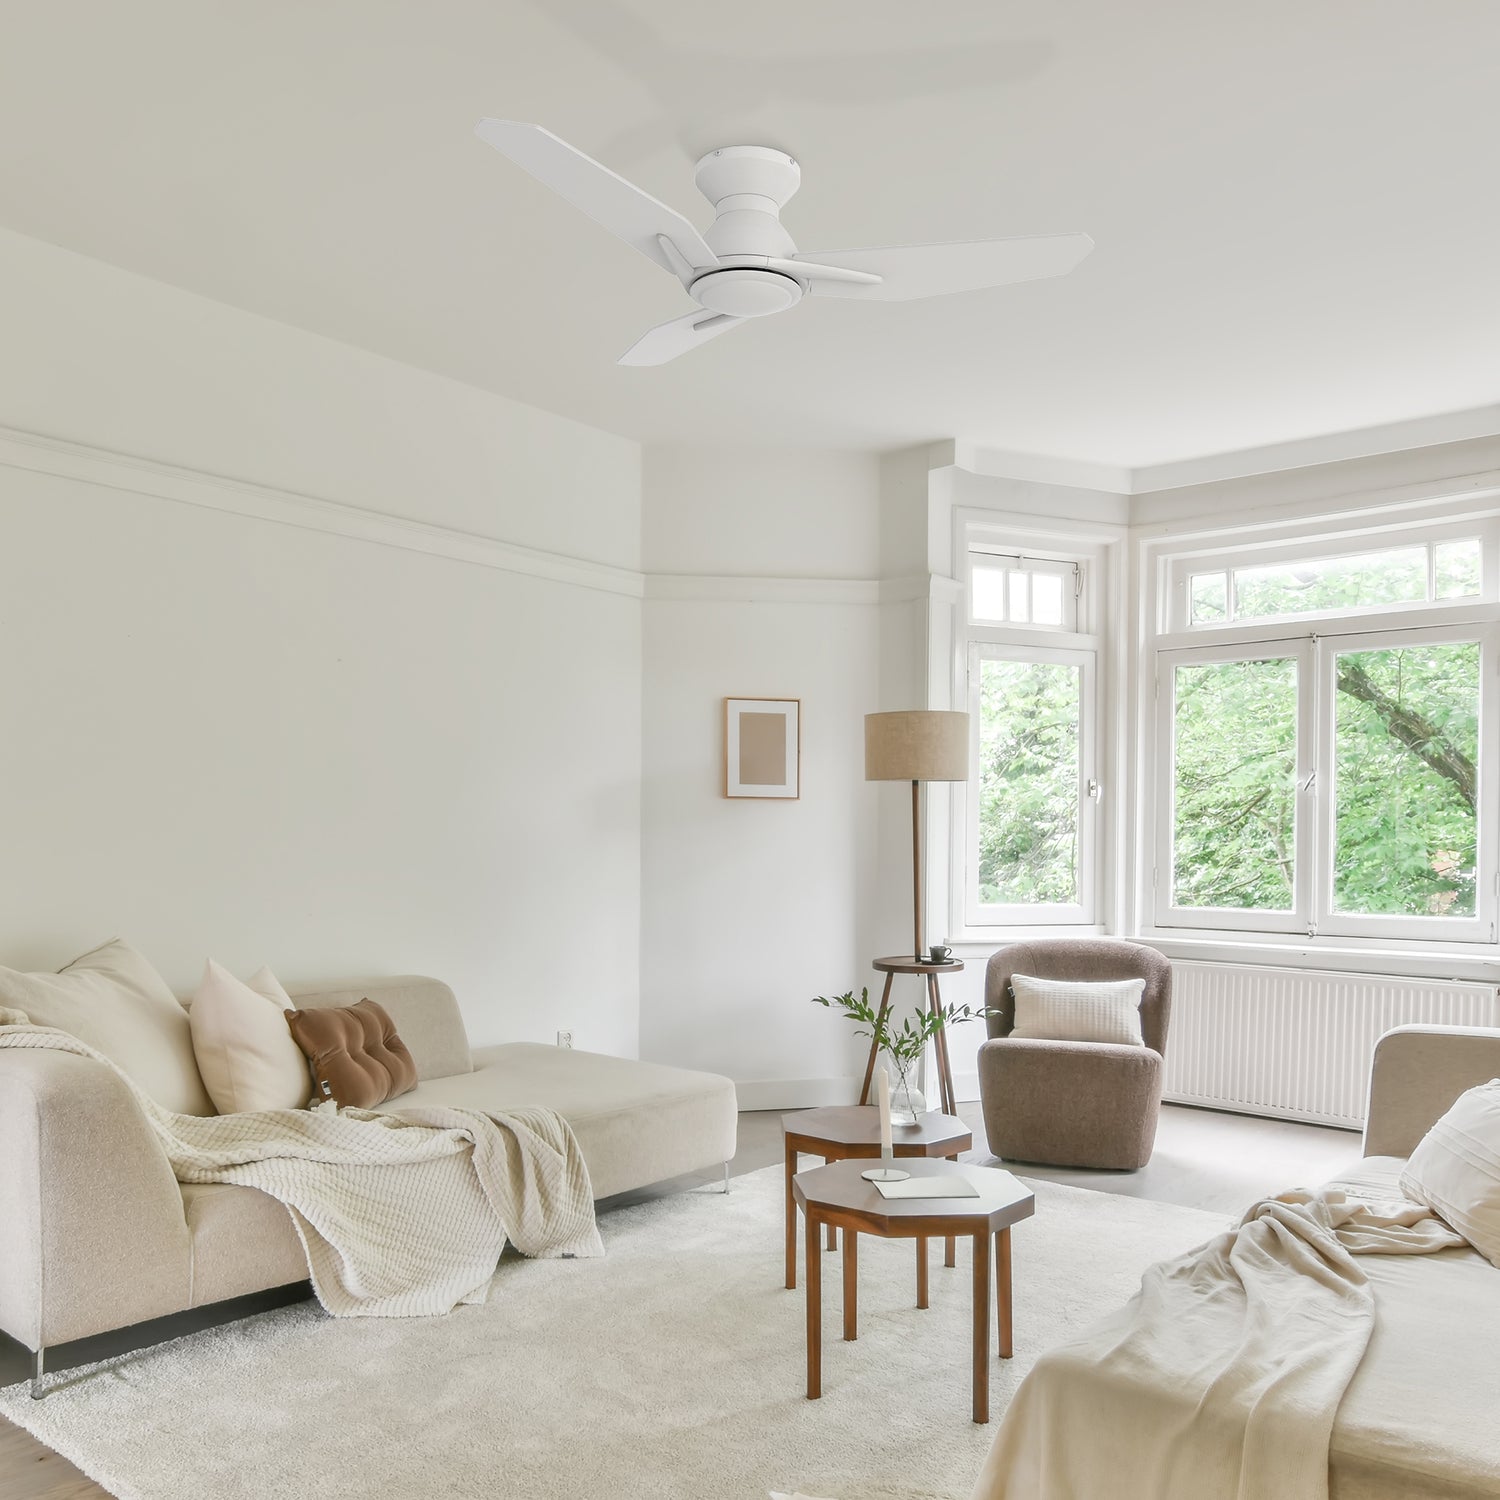 Flush mount ceiling fan with remote 44 inch, featuring a white finish design that complements modern living rooms. This indoor ceiling fan is also suitable for small room sizes. 